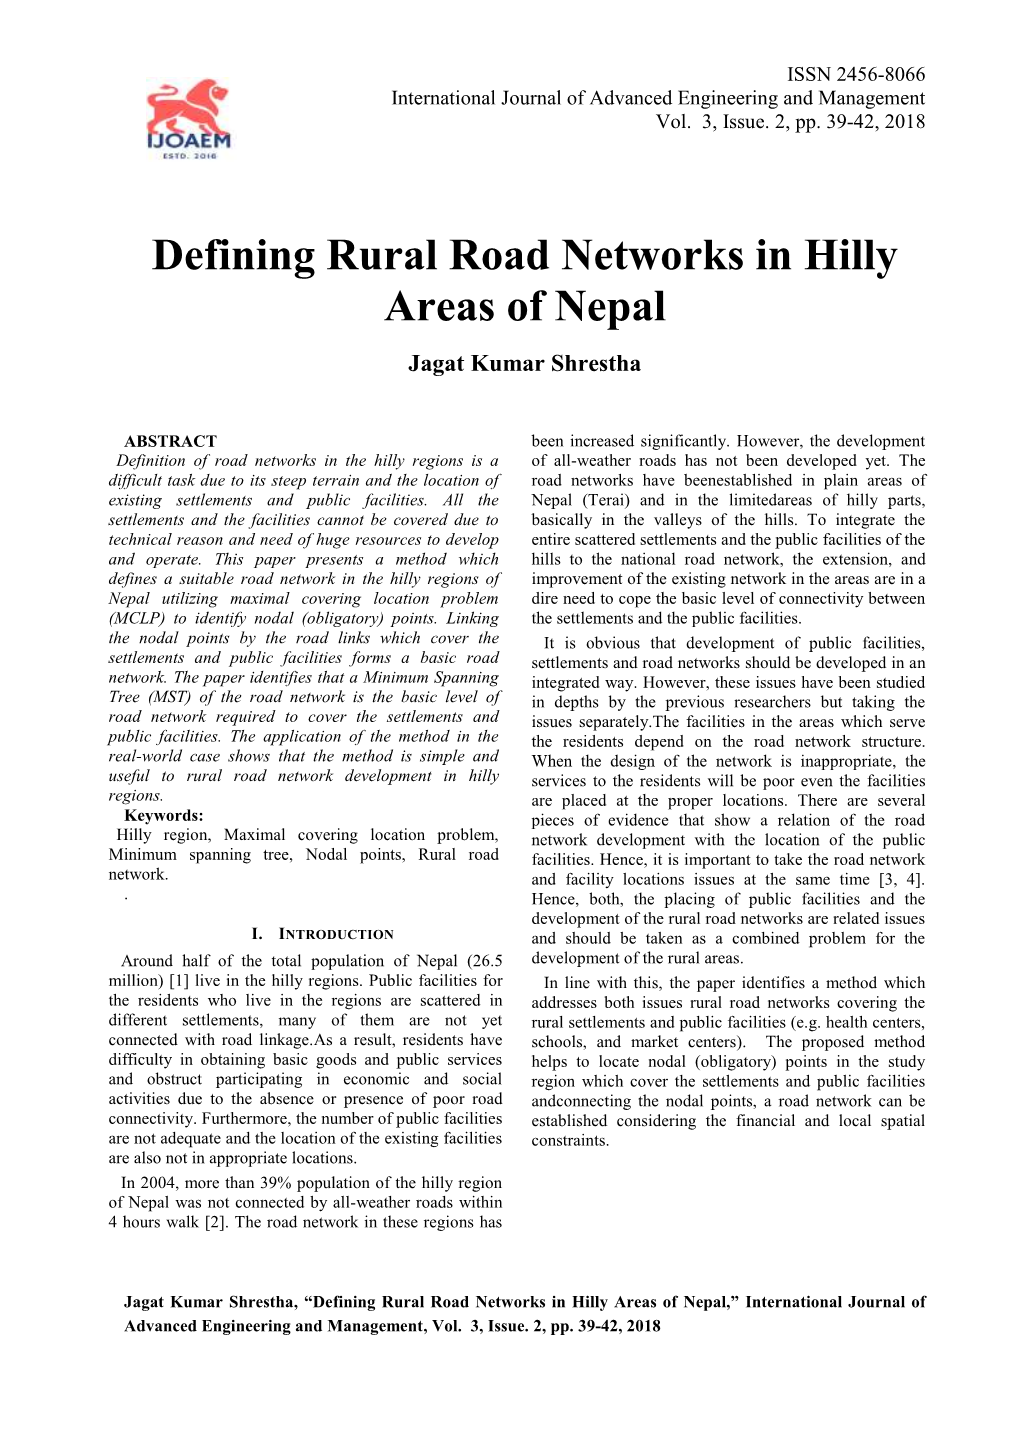 Defining Rural Road Networks in Hilly Areas of Nepal